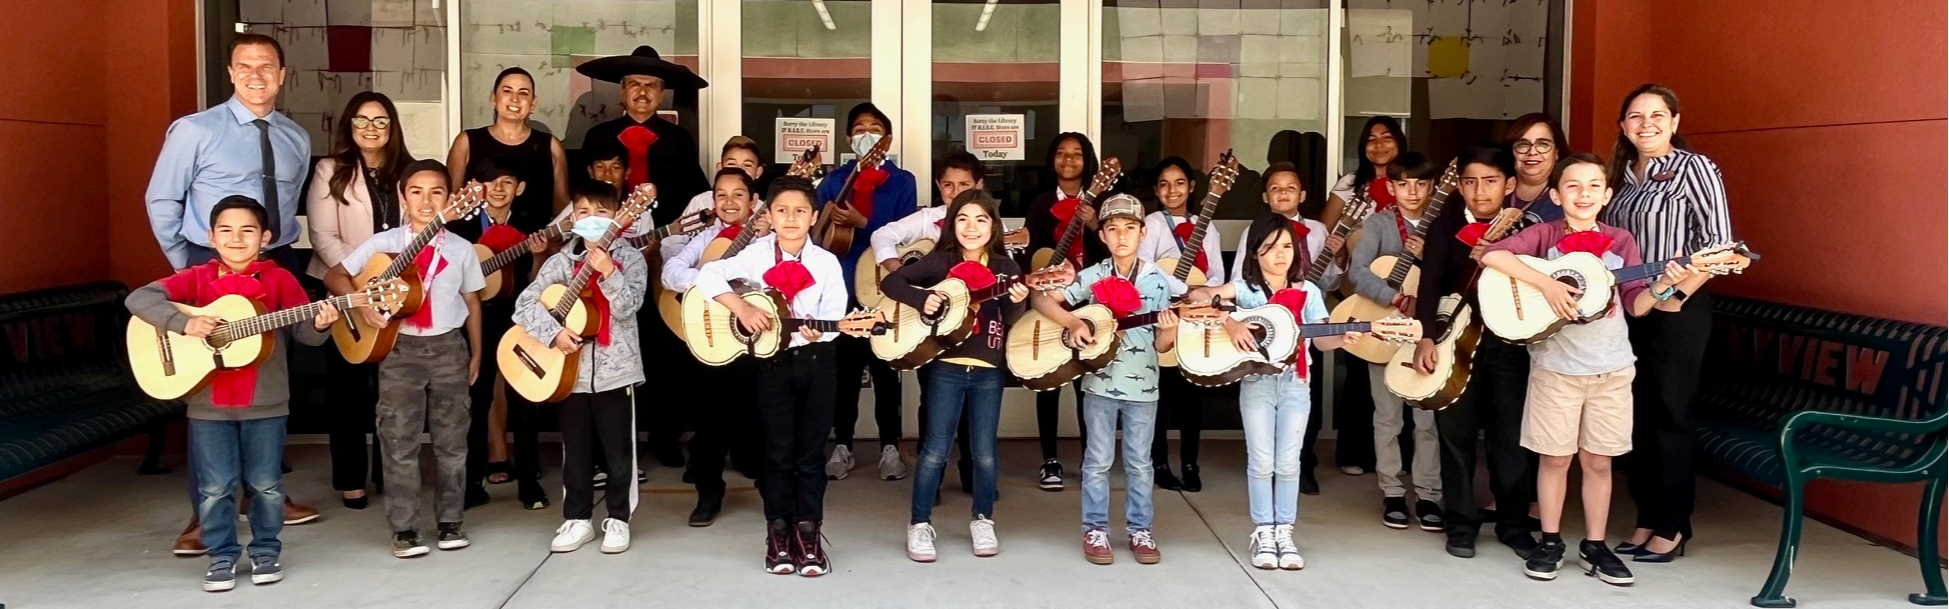 picture with students holding guitars including district superintendent and asst superintendent